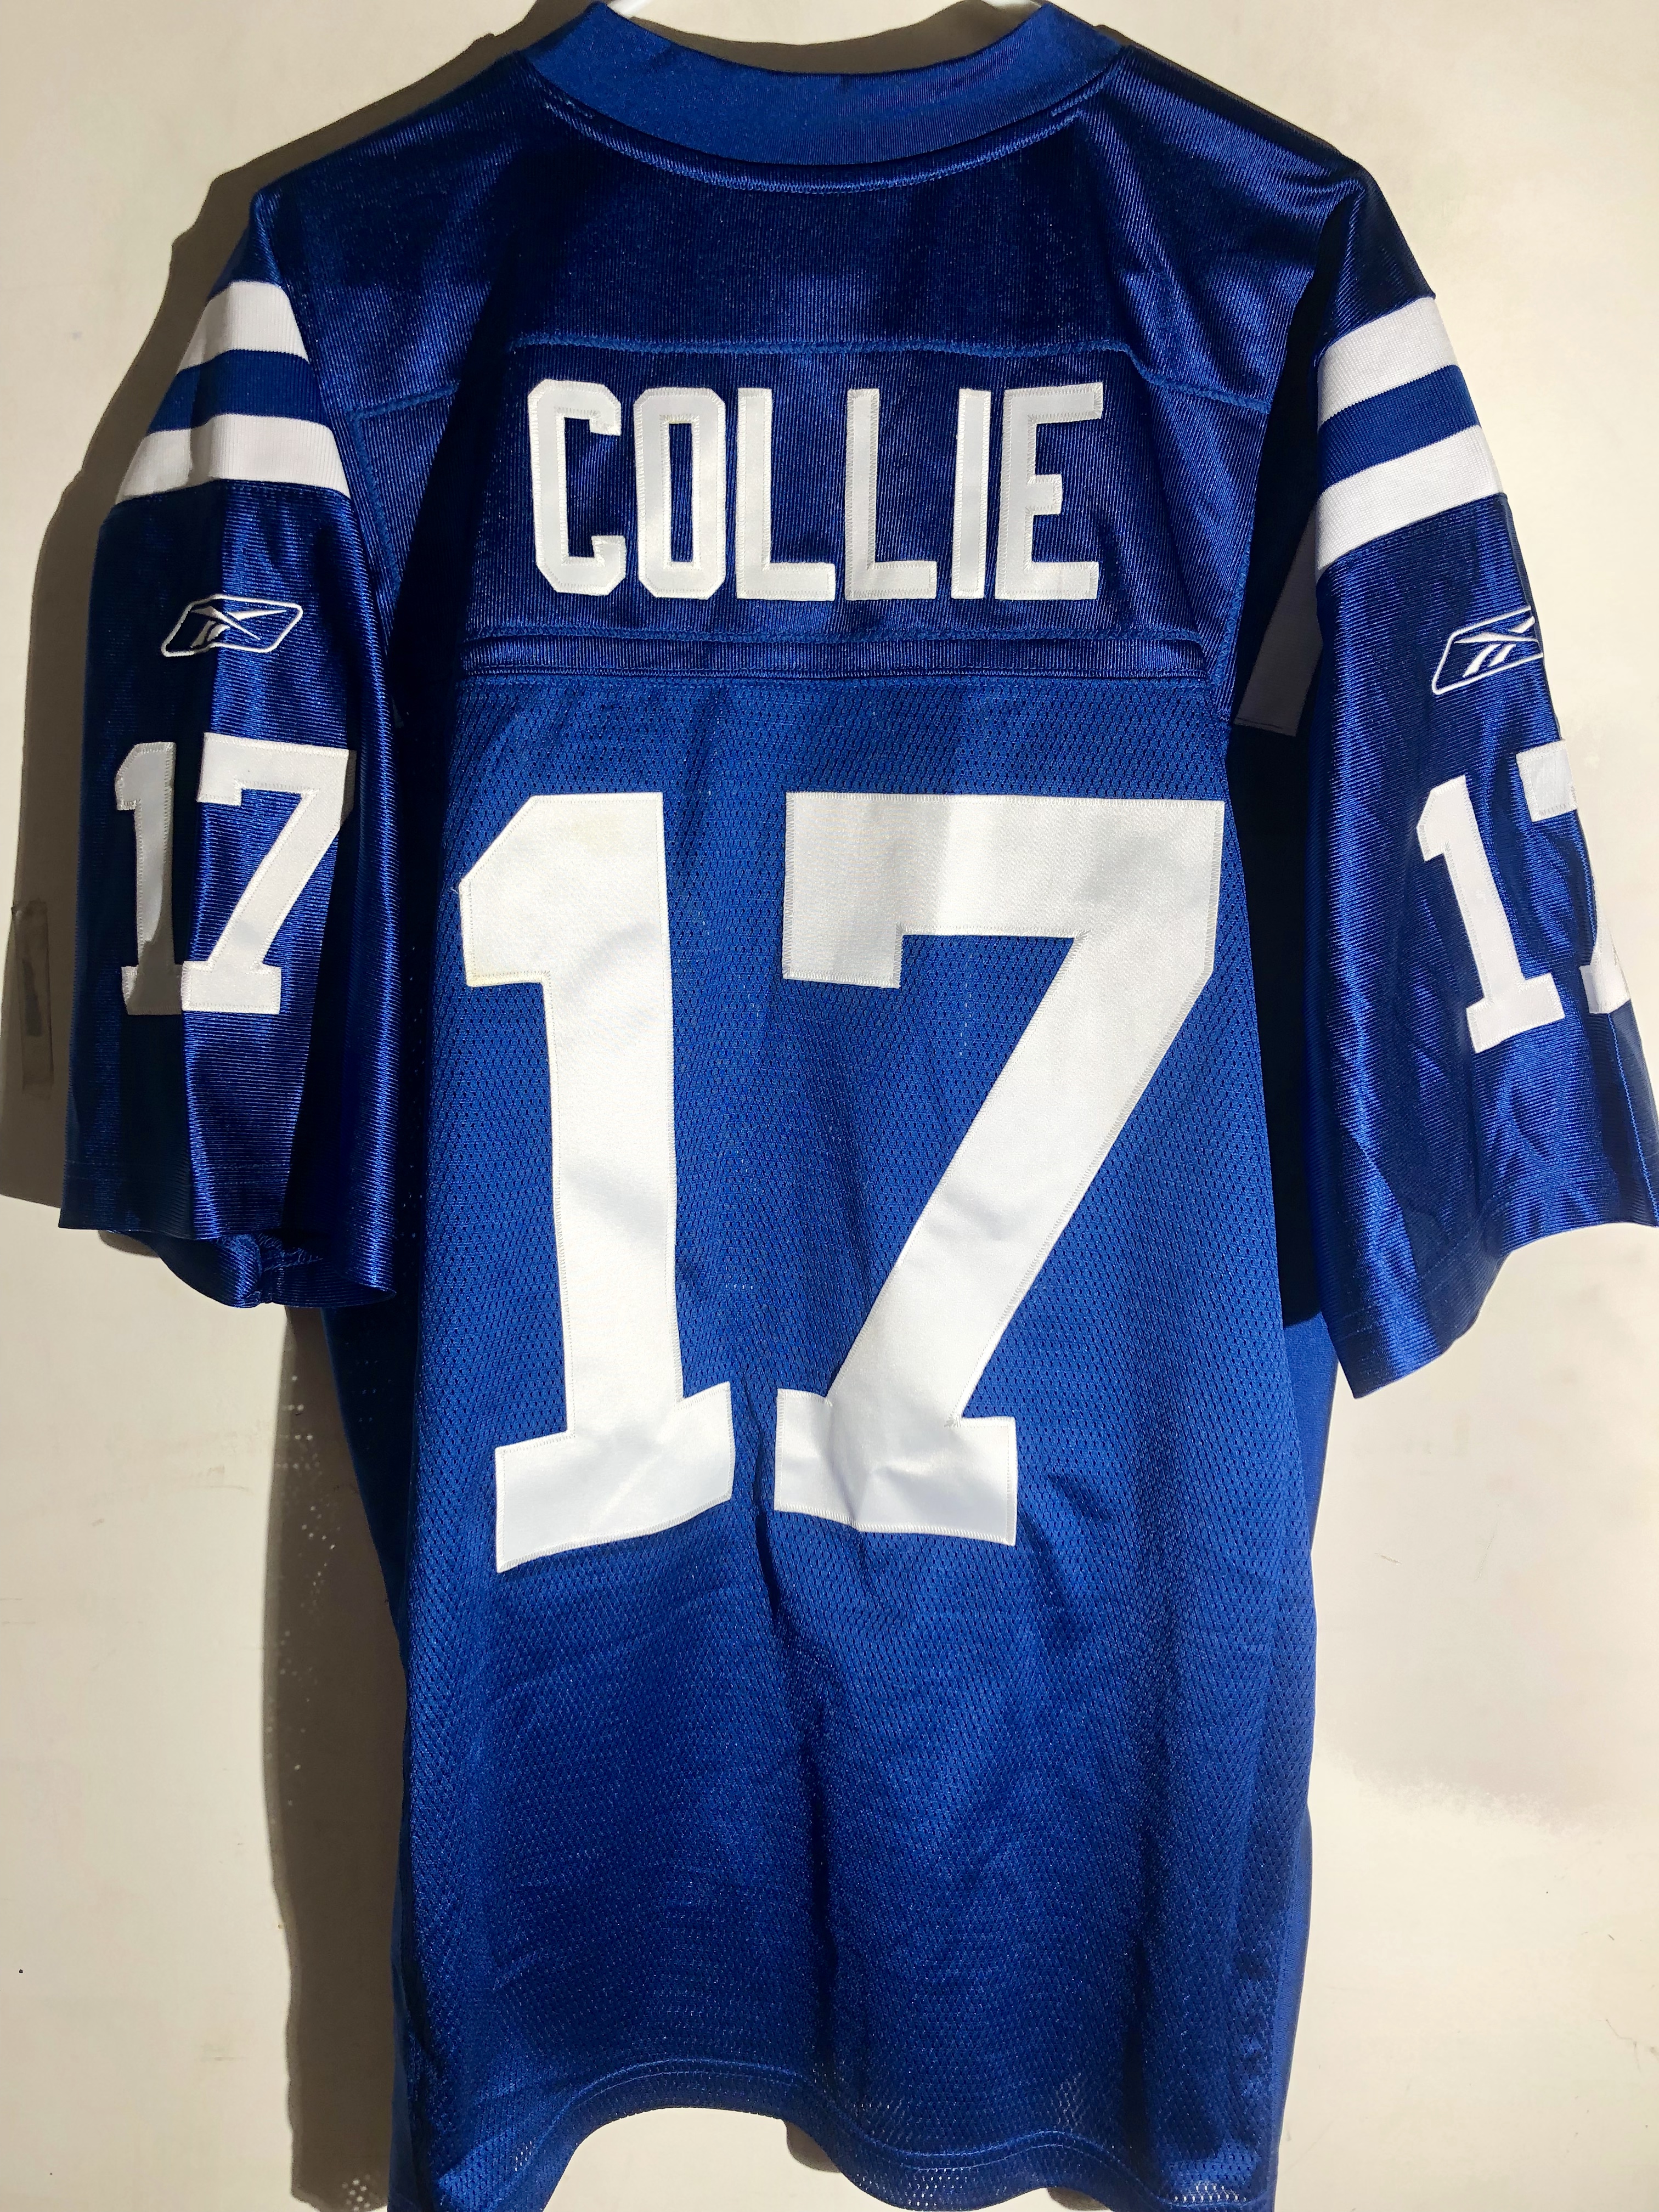 Authentic NFL Jersey Indianapolis Colts 